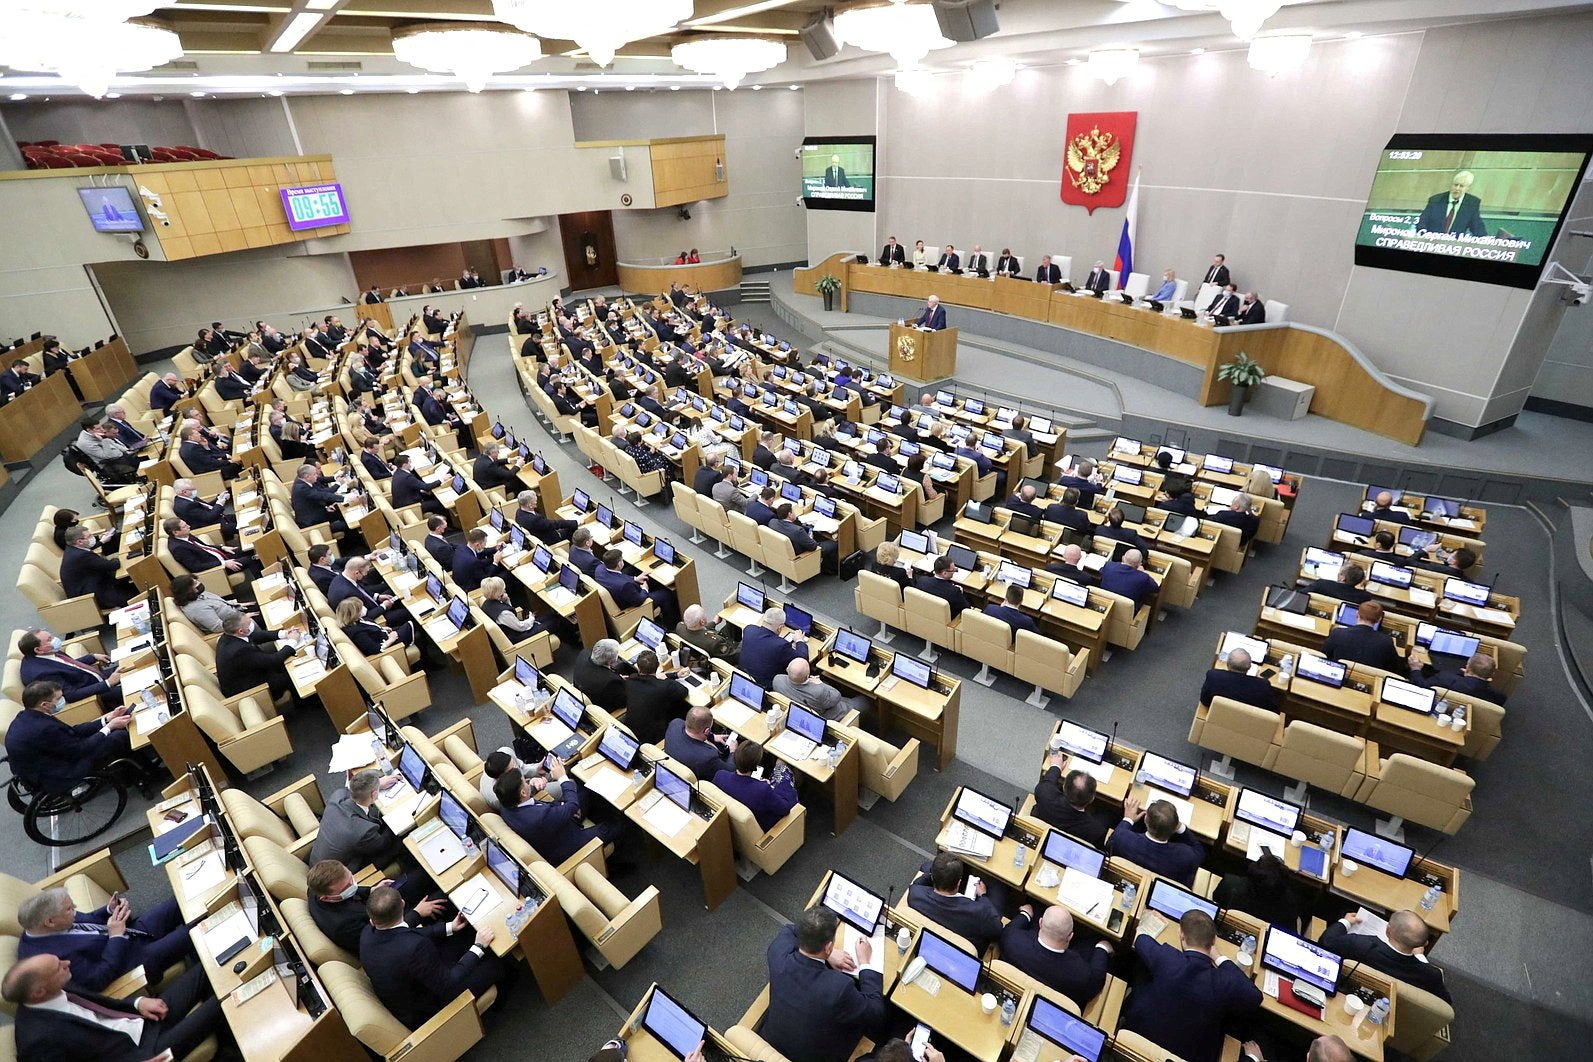 Russian lawmakers attend a session of the State Duma, the lower house of parliament